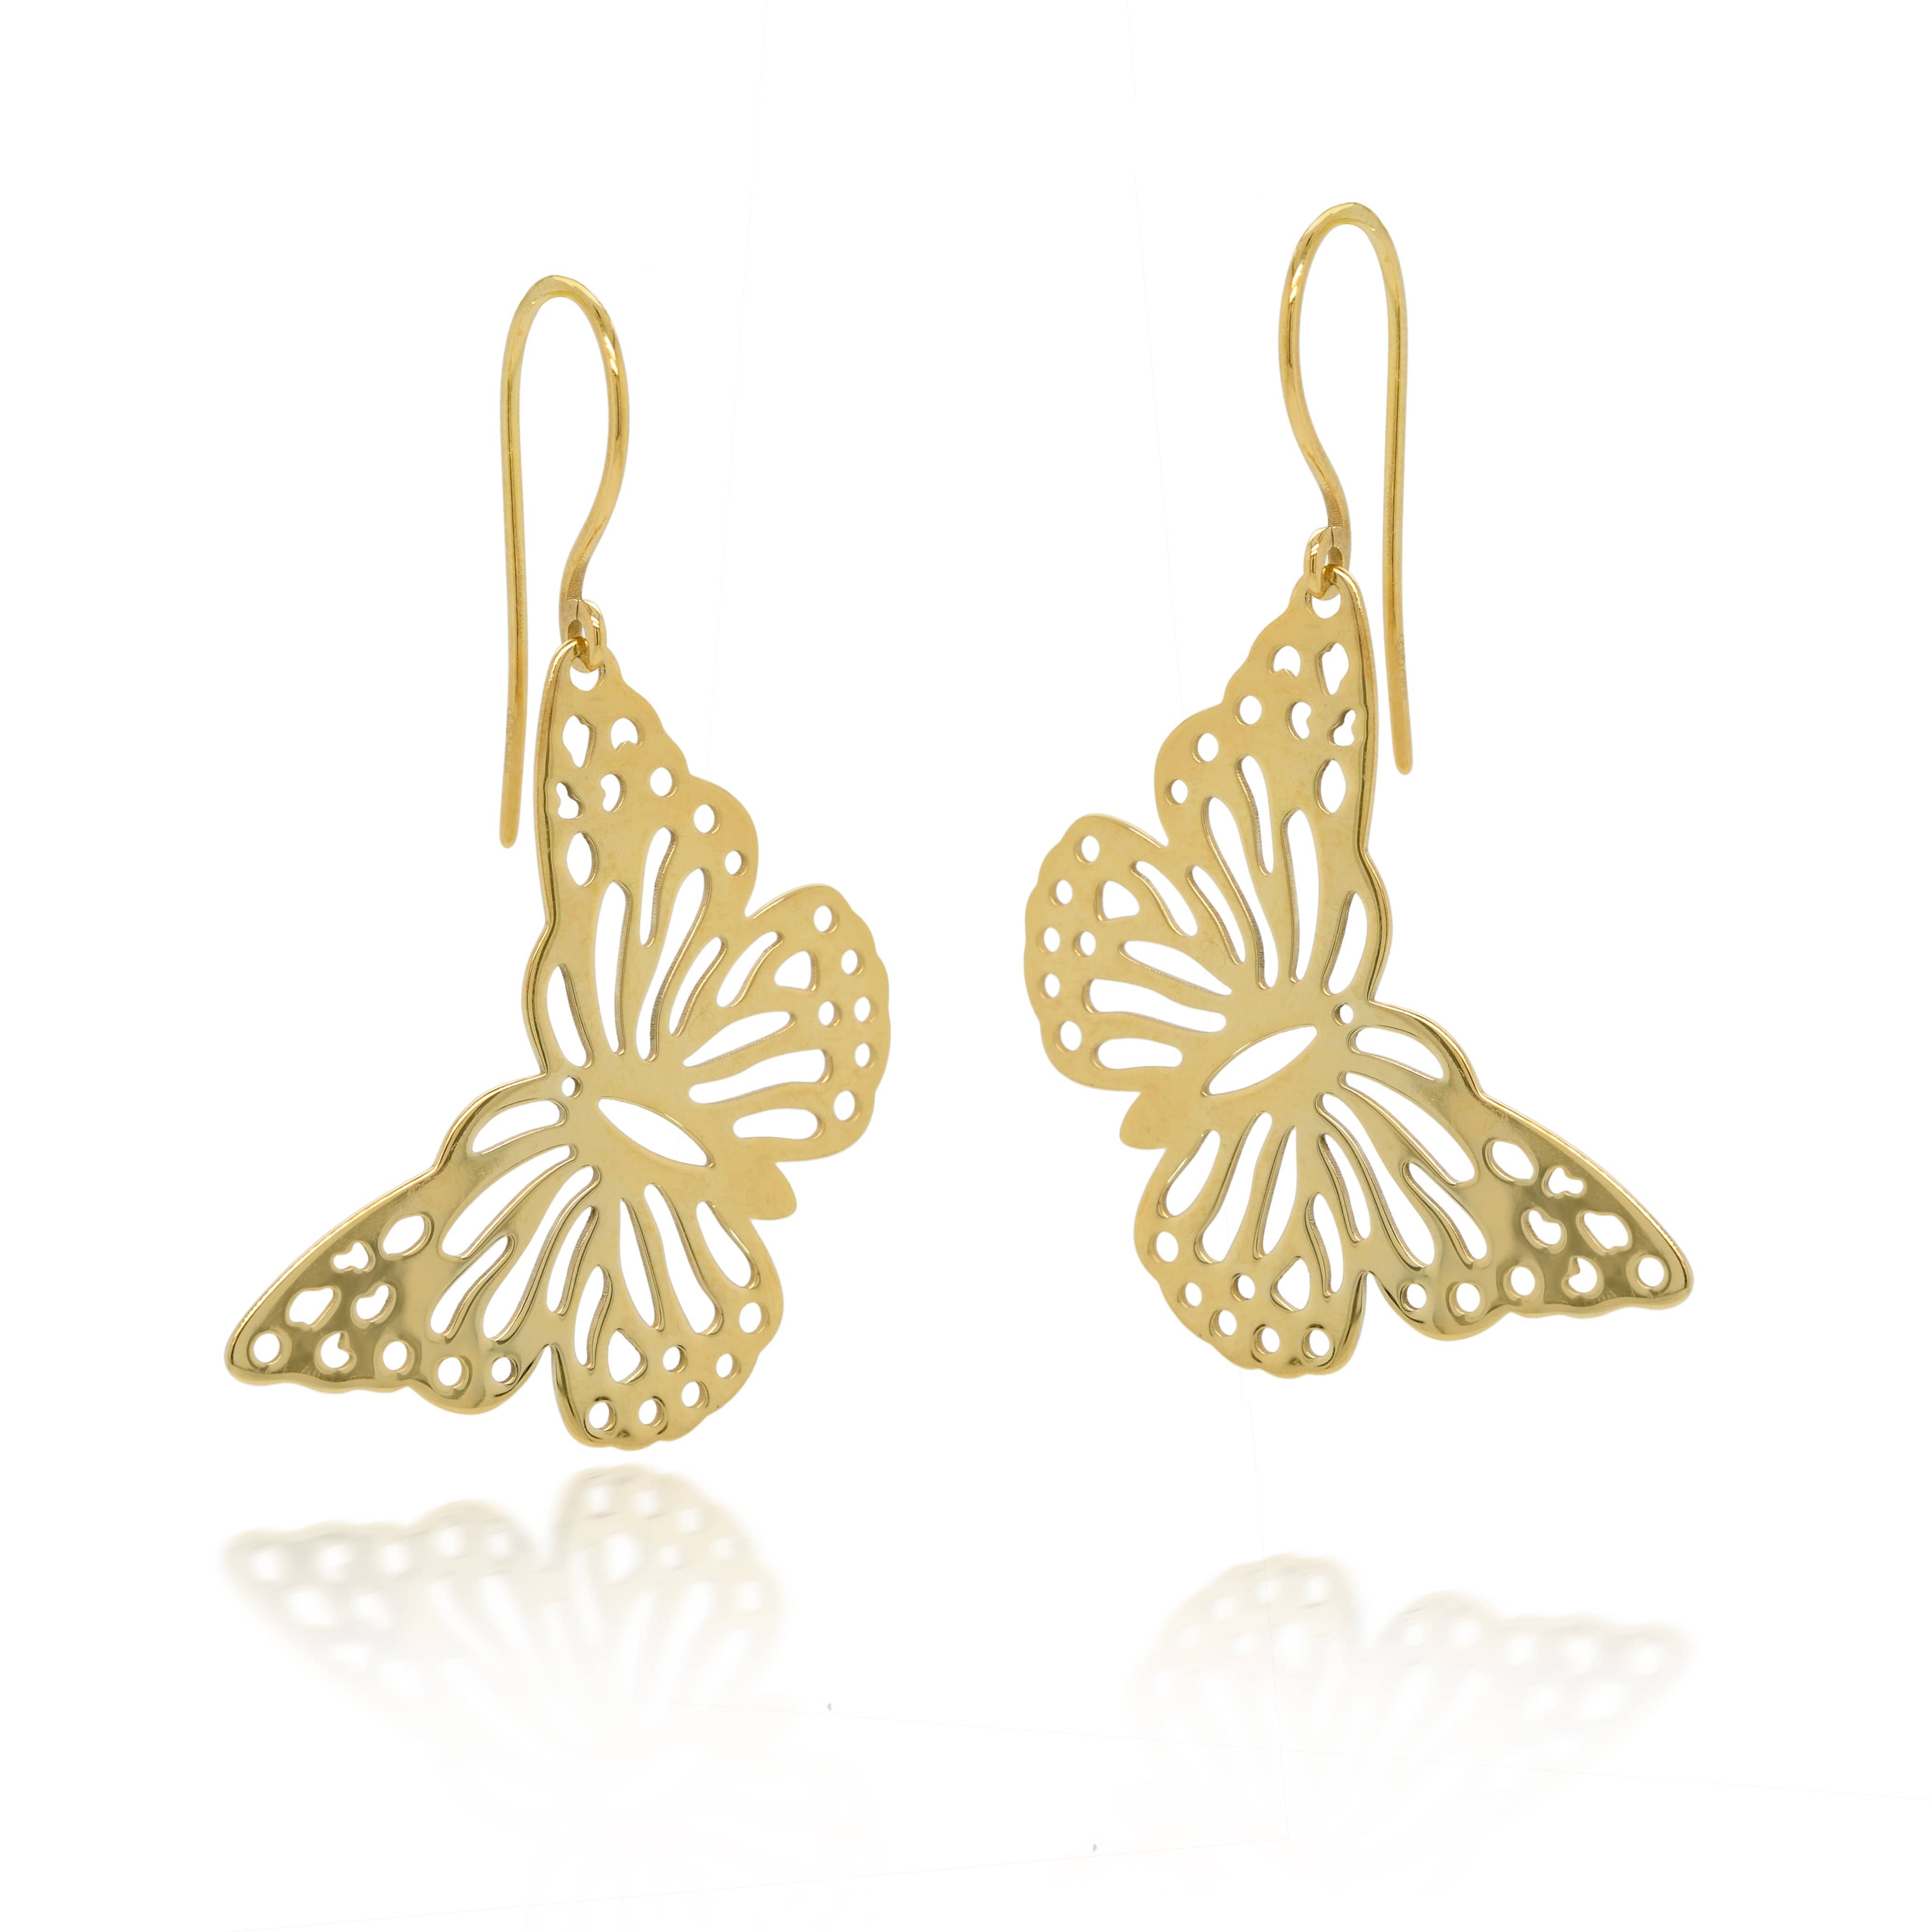 Lynora Jewellery Earring Yellow Gold Plate Papillon Earrings Yellow Gold Plate